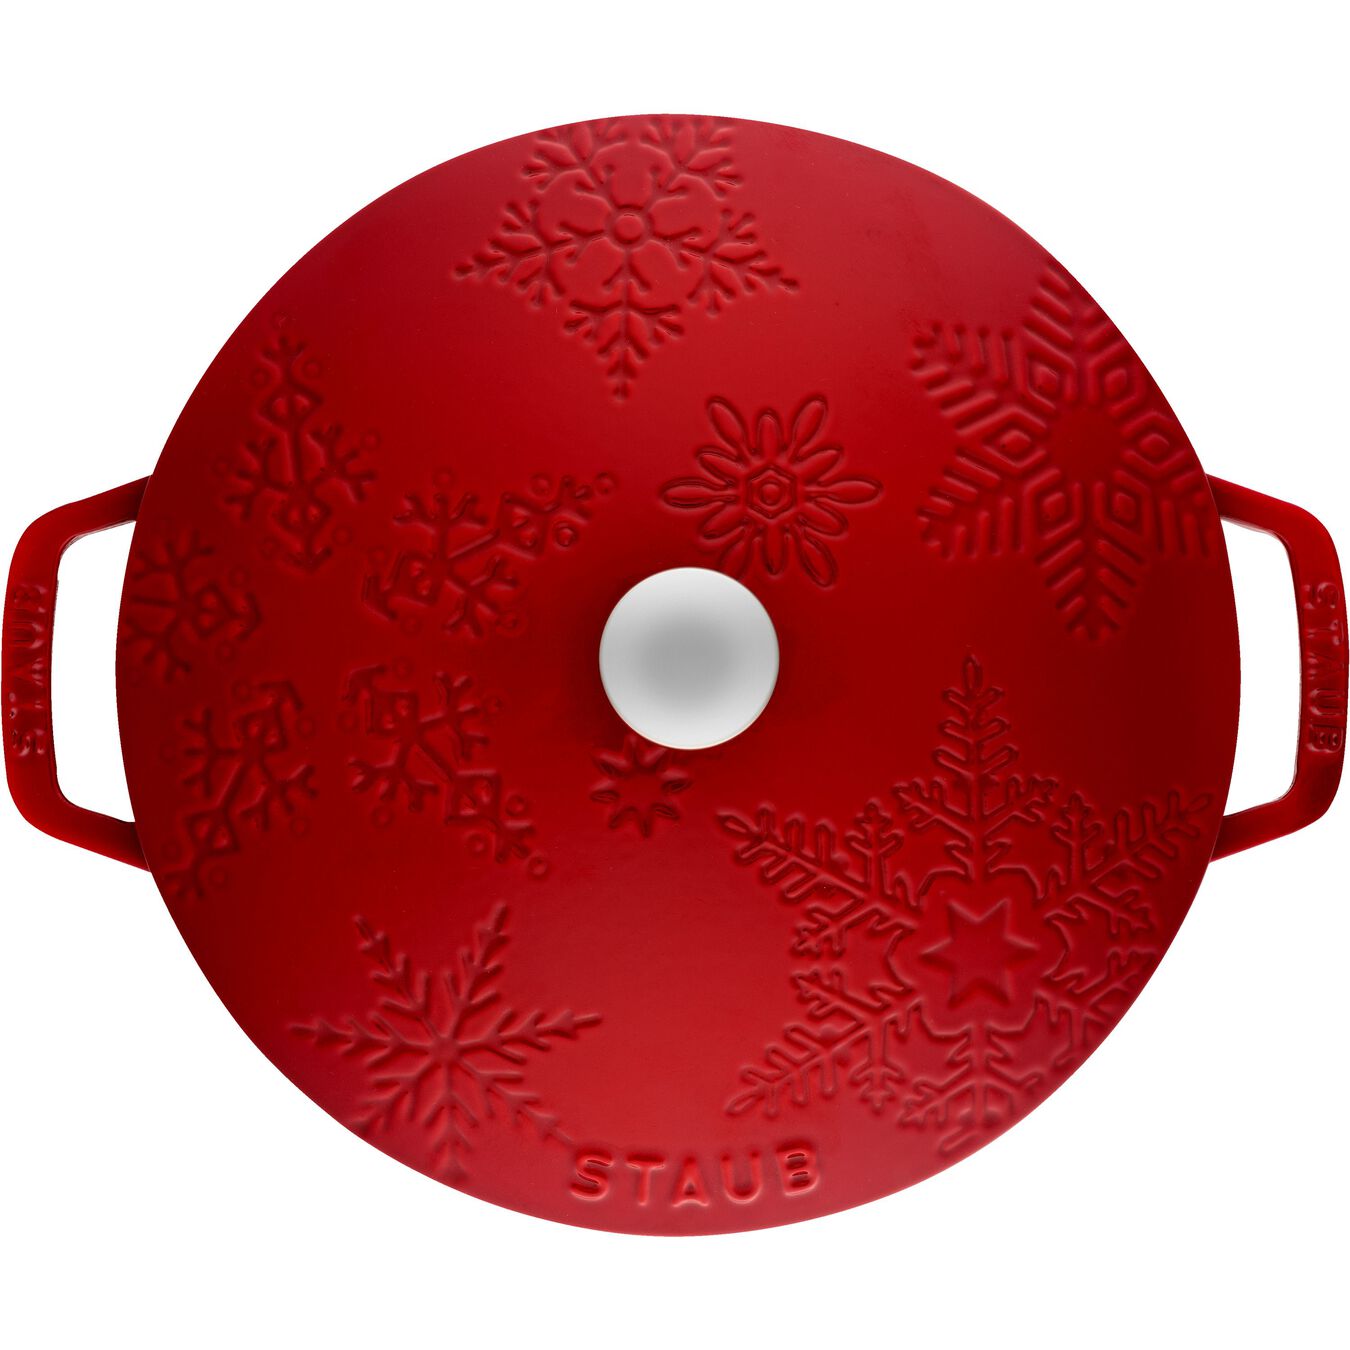 3.6 l cast iron round Winter Essential French Oven, cherry - Visual Imperfections,,large 3